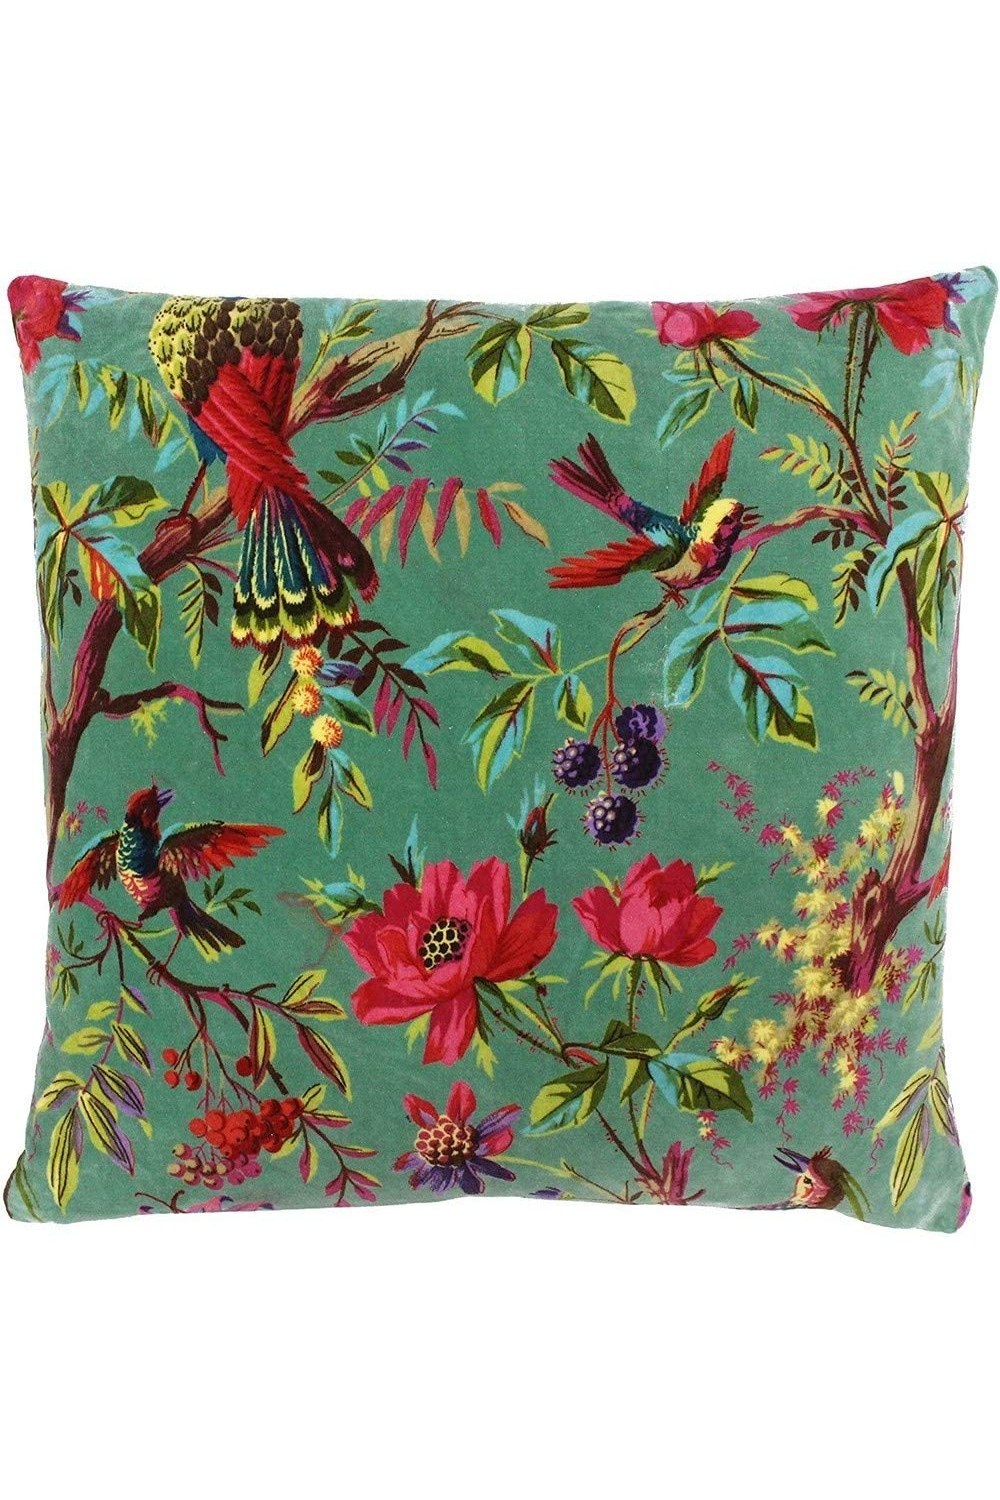 Riva Home Birds Of Paradise Floral Pattern Square Cushion Cover (Aqua Blue) (19.7 x 19.7in)